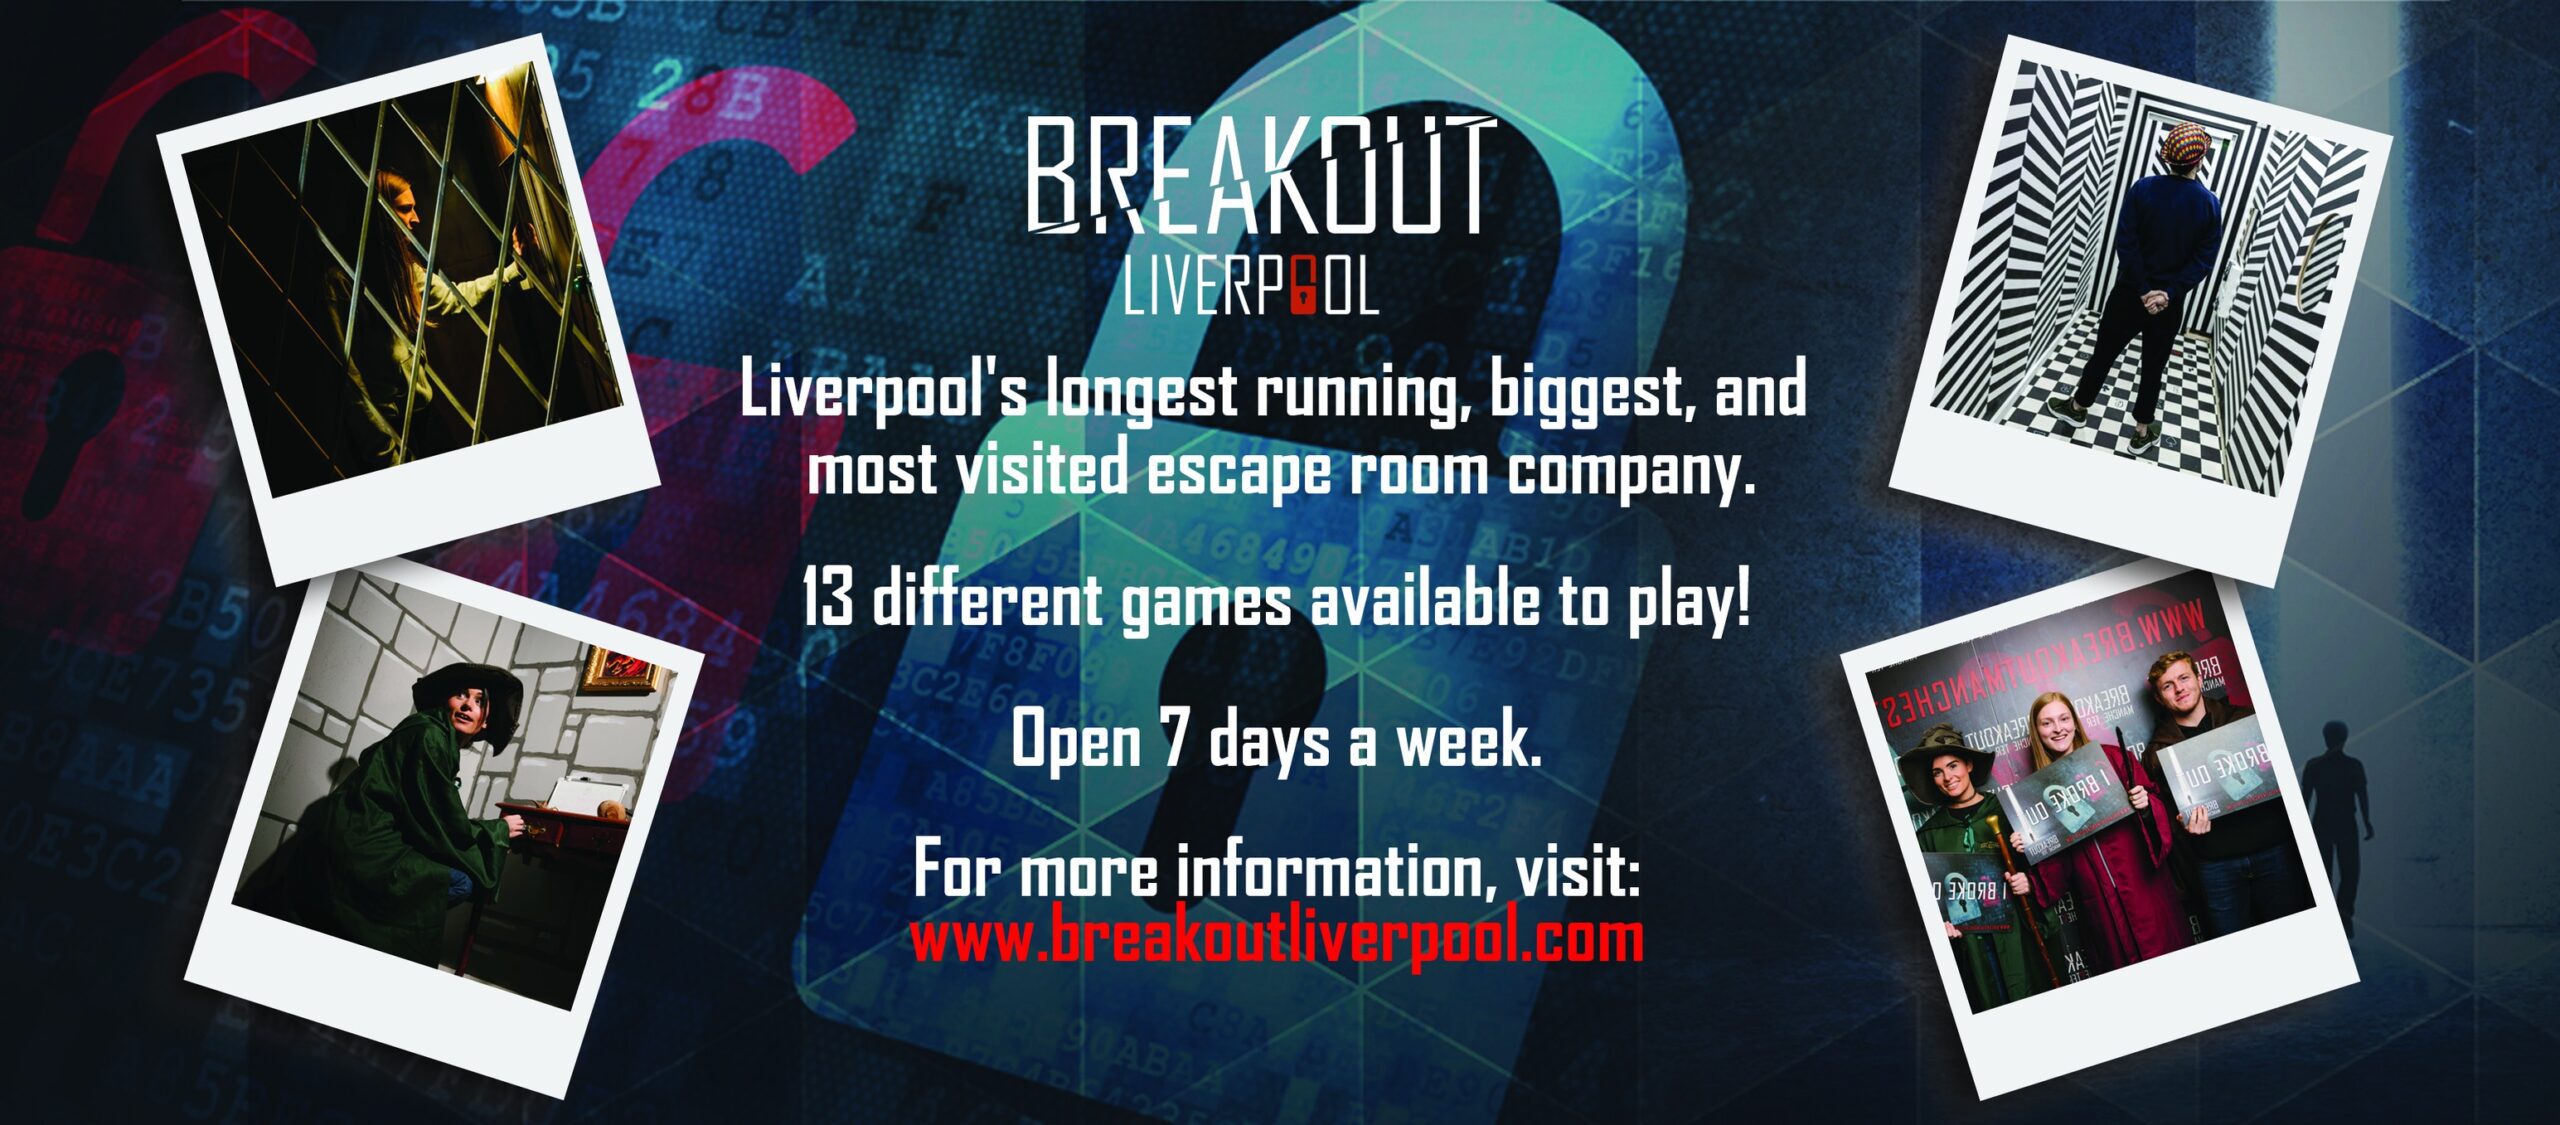 10% off at Breakout Liverpool